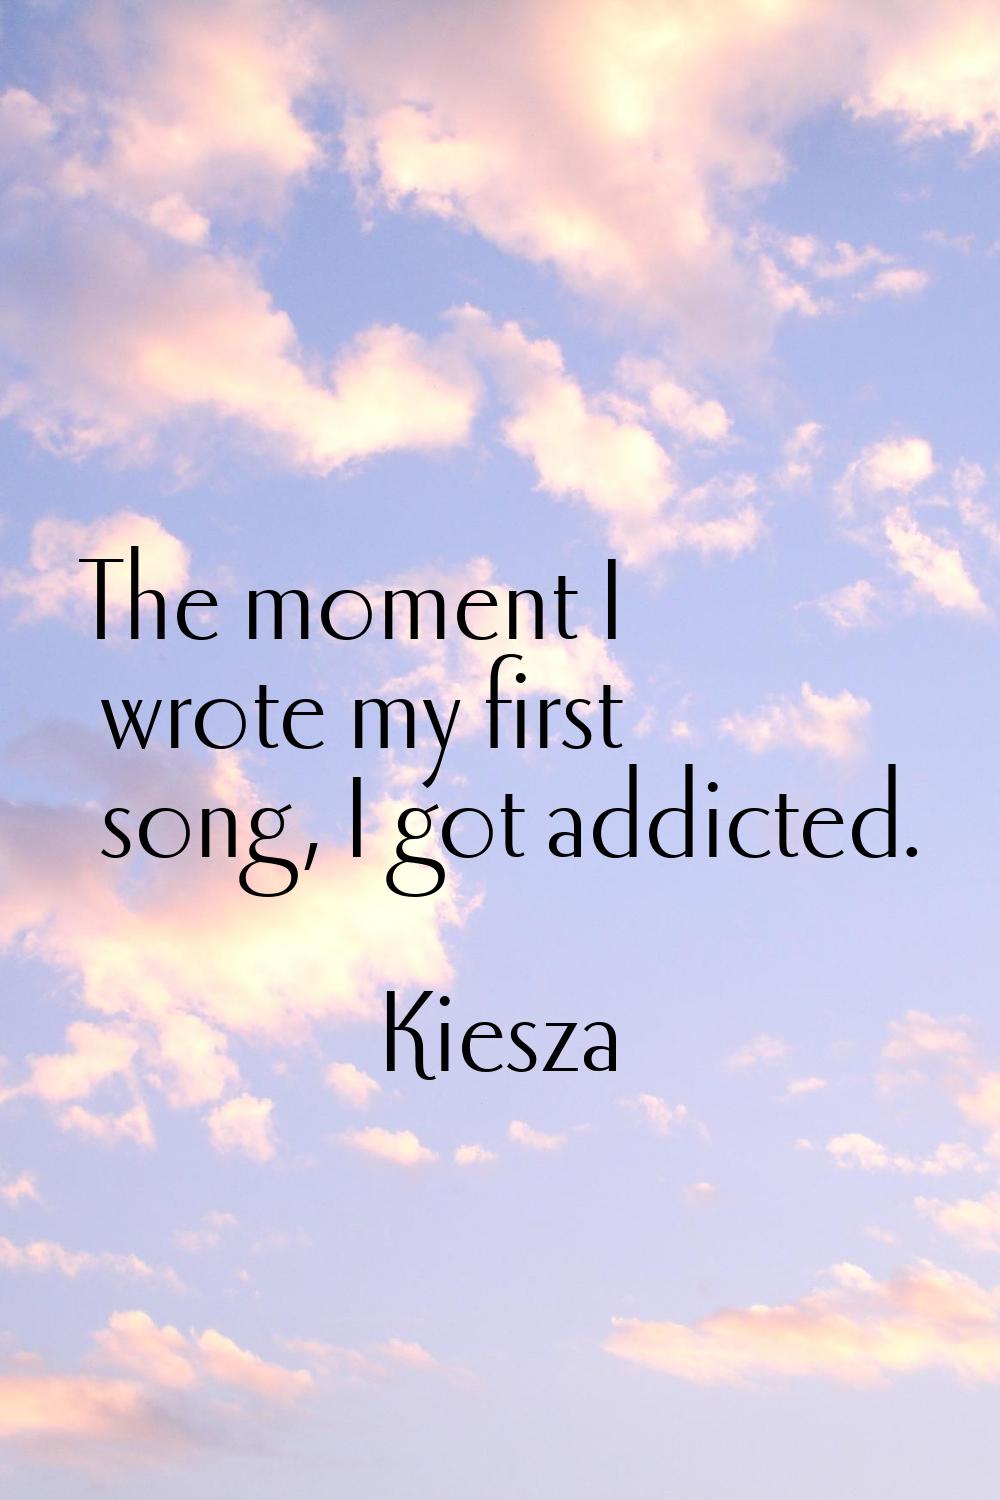 The moment I wrote my first song, I got addicted.